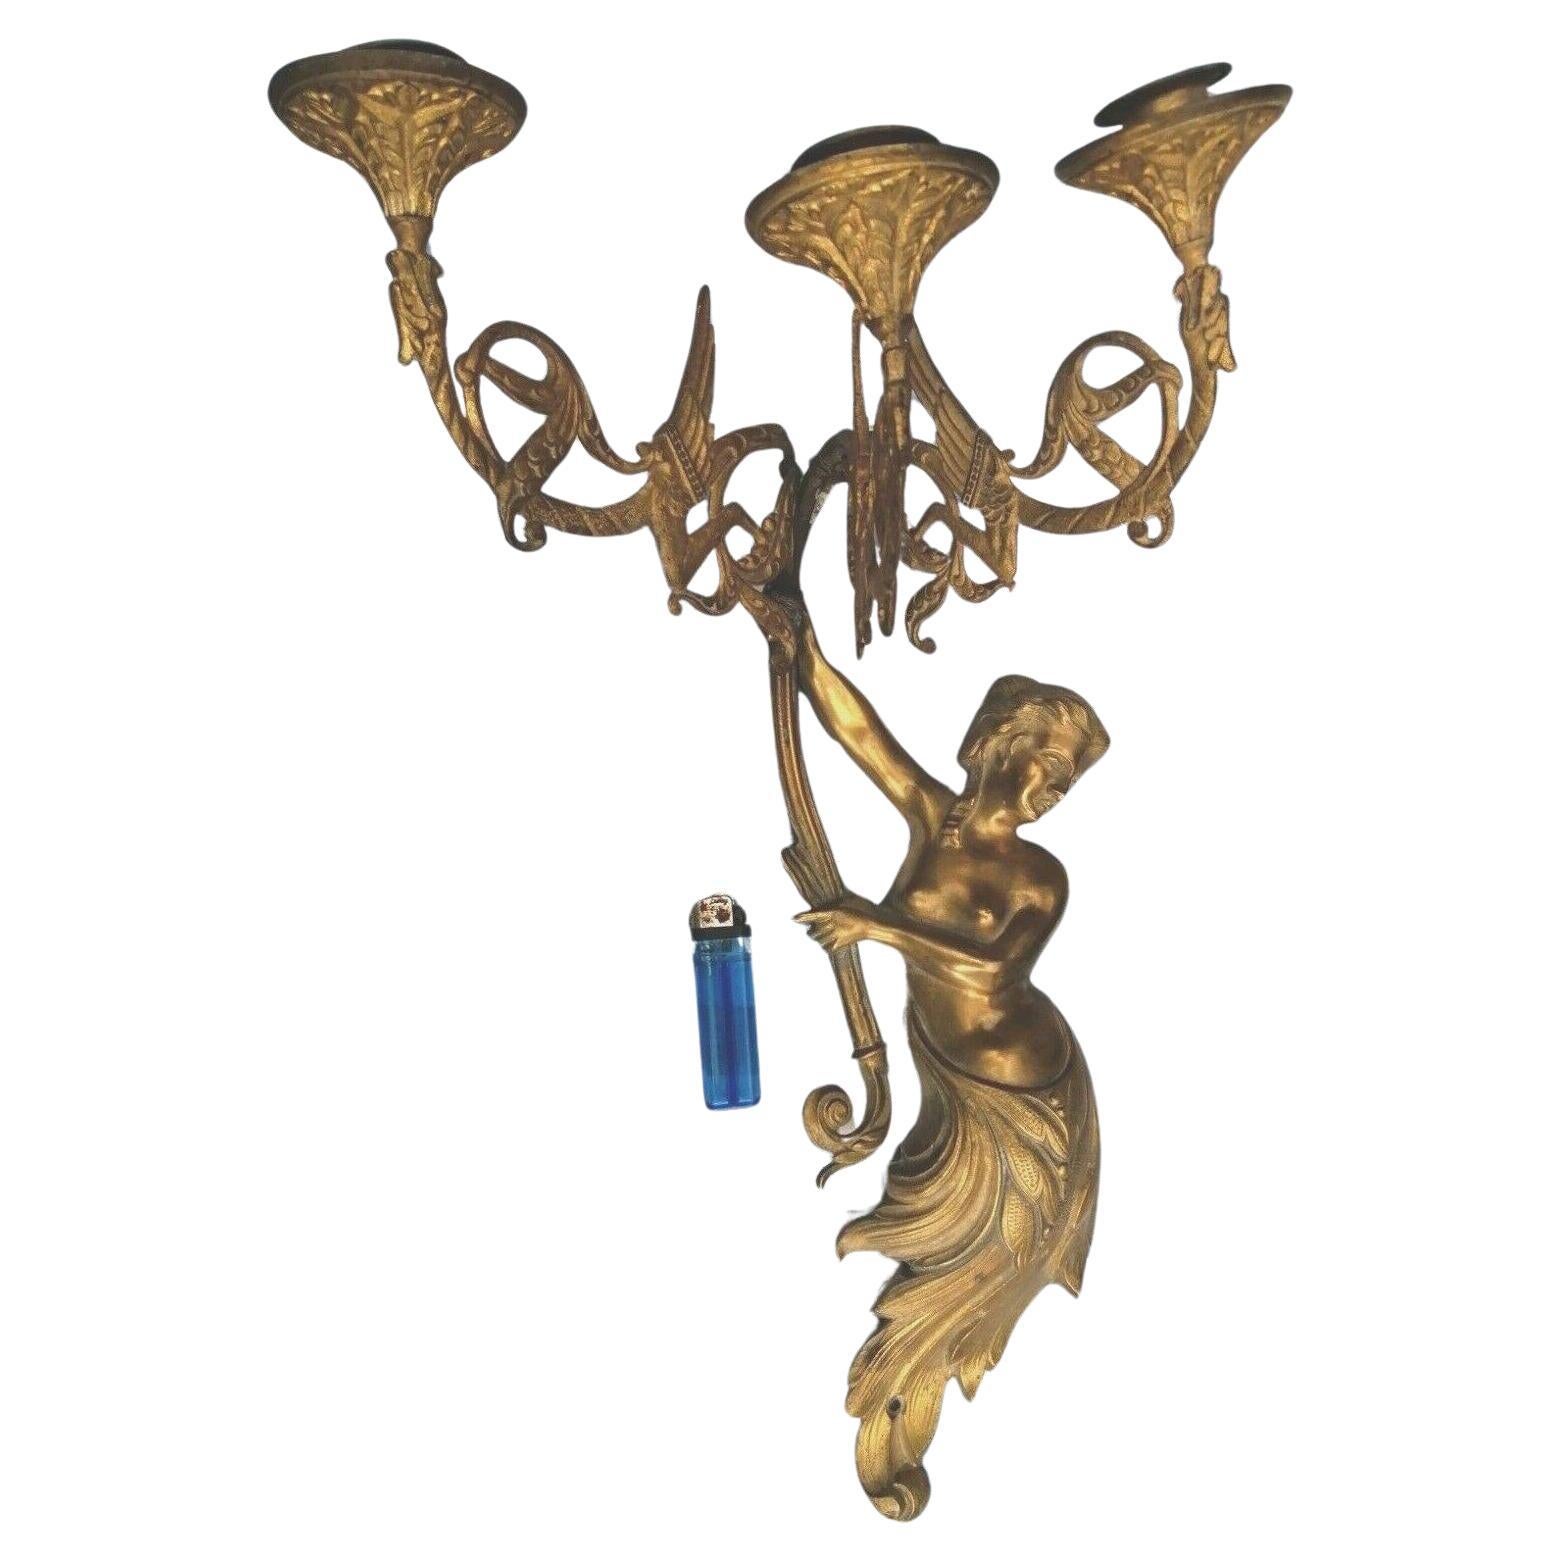 1920s French Art Deco Bronze Mermaid Wi/ Sea Serpents Wall Sconce after Guillema